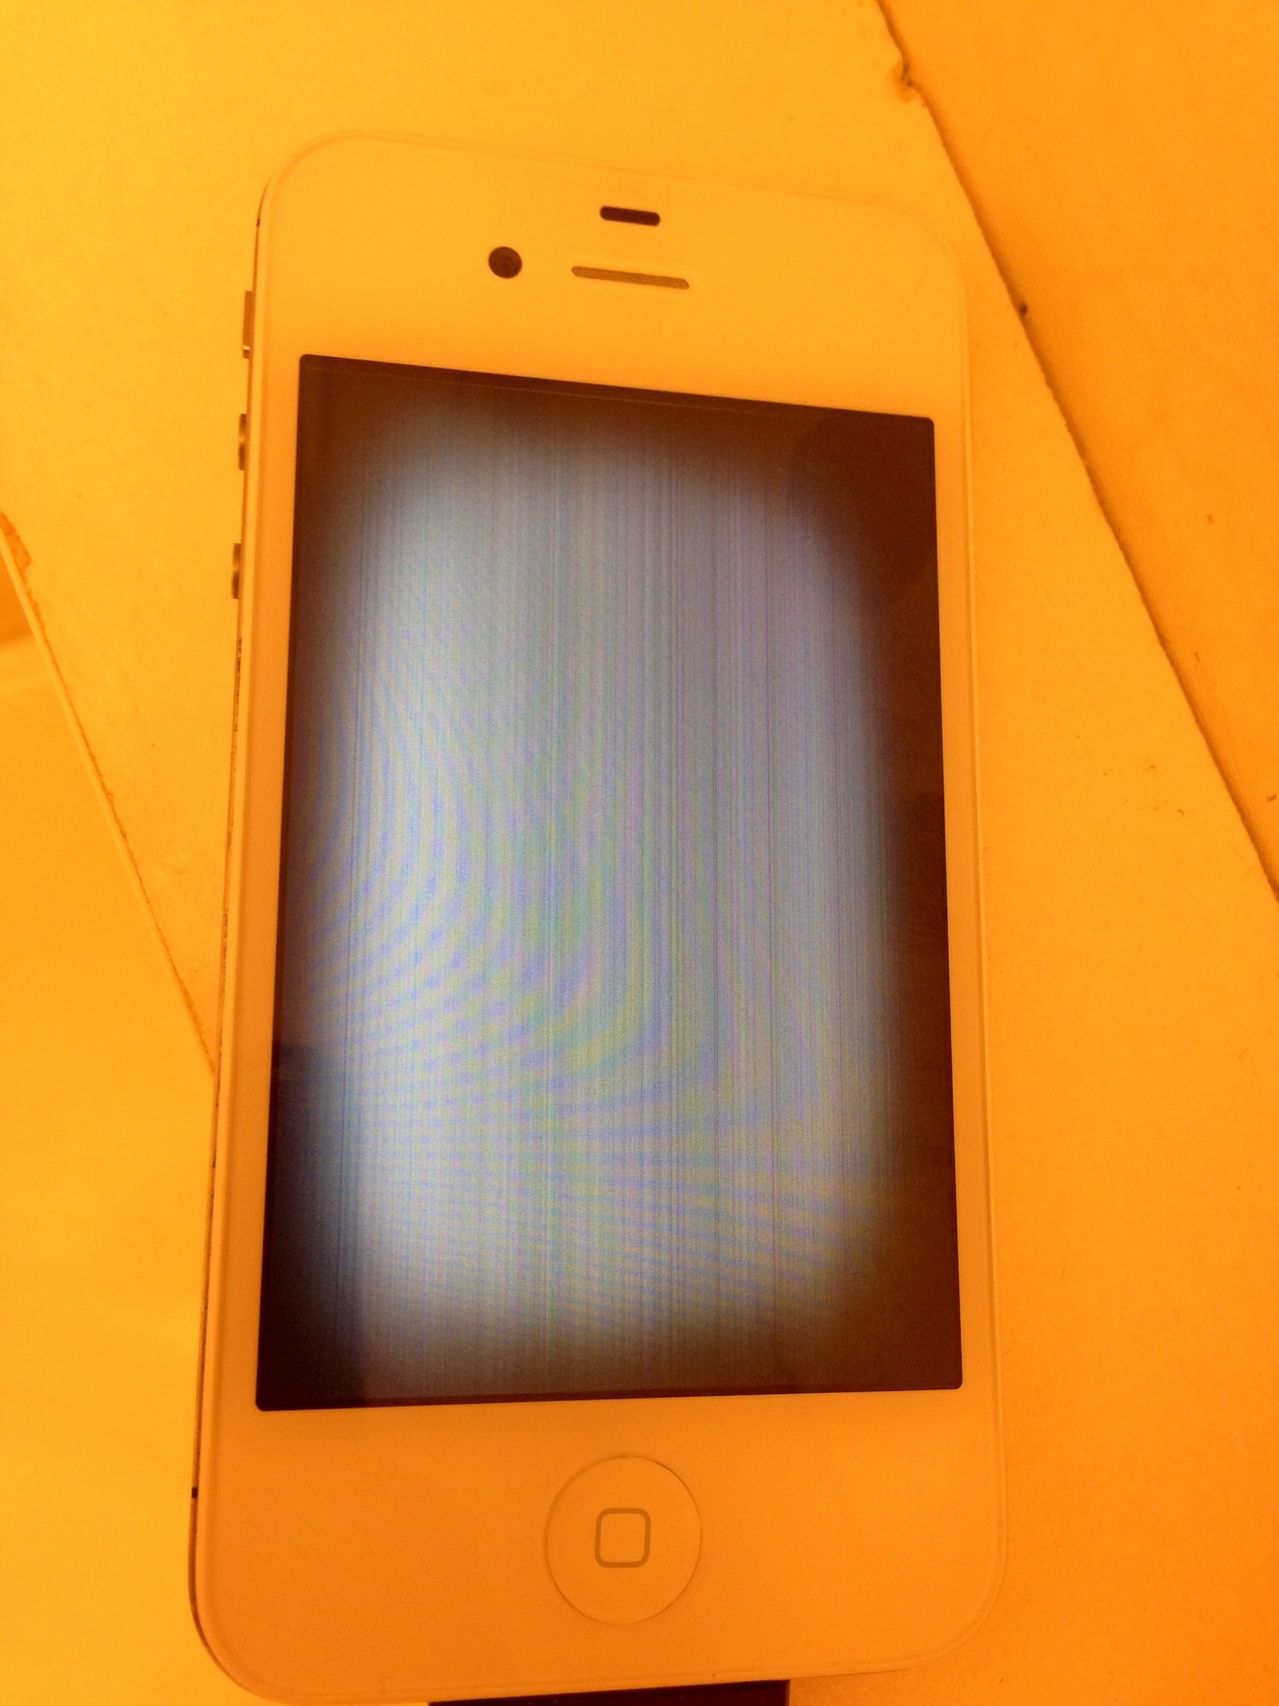 IPhone 4S screen replaced now it s flickering